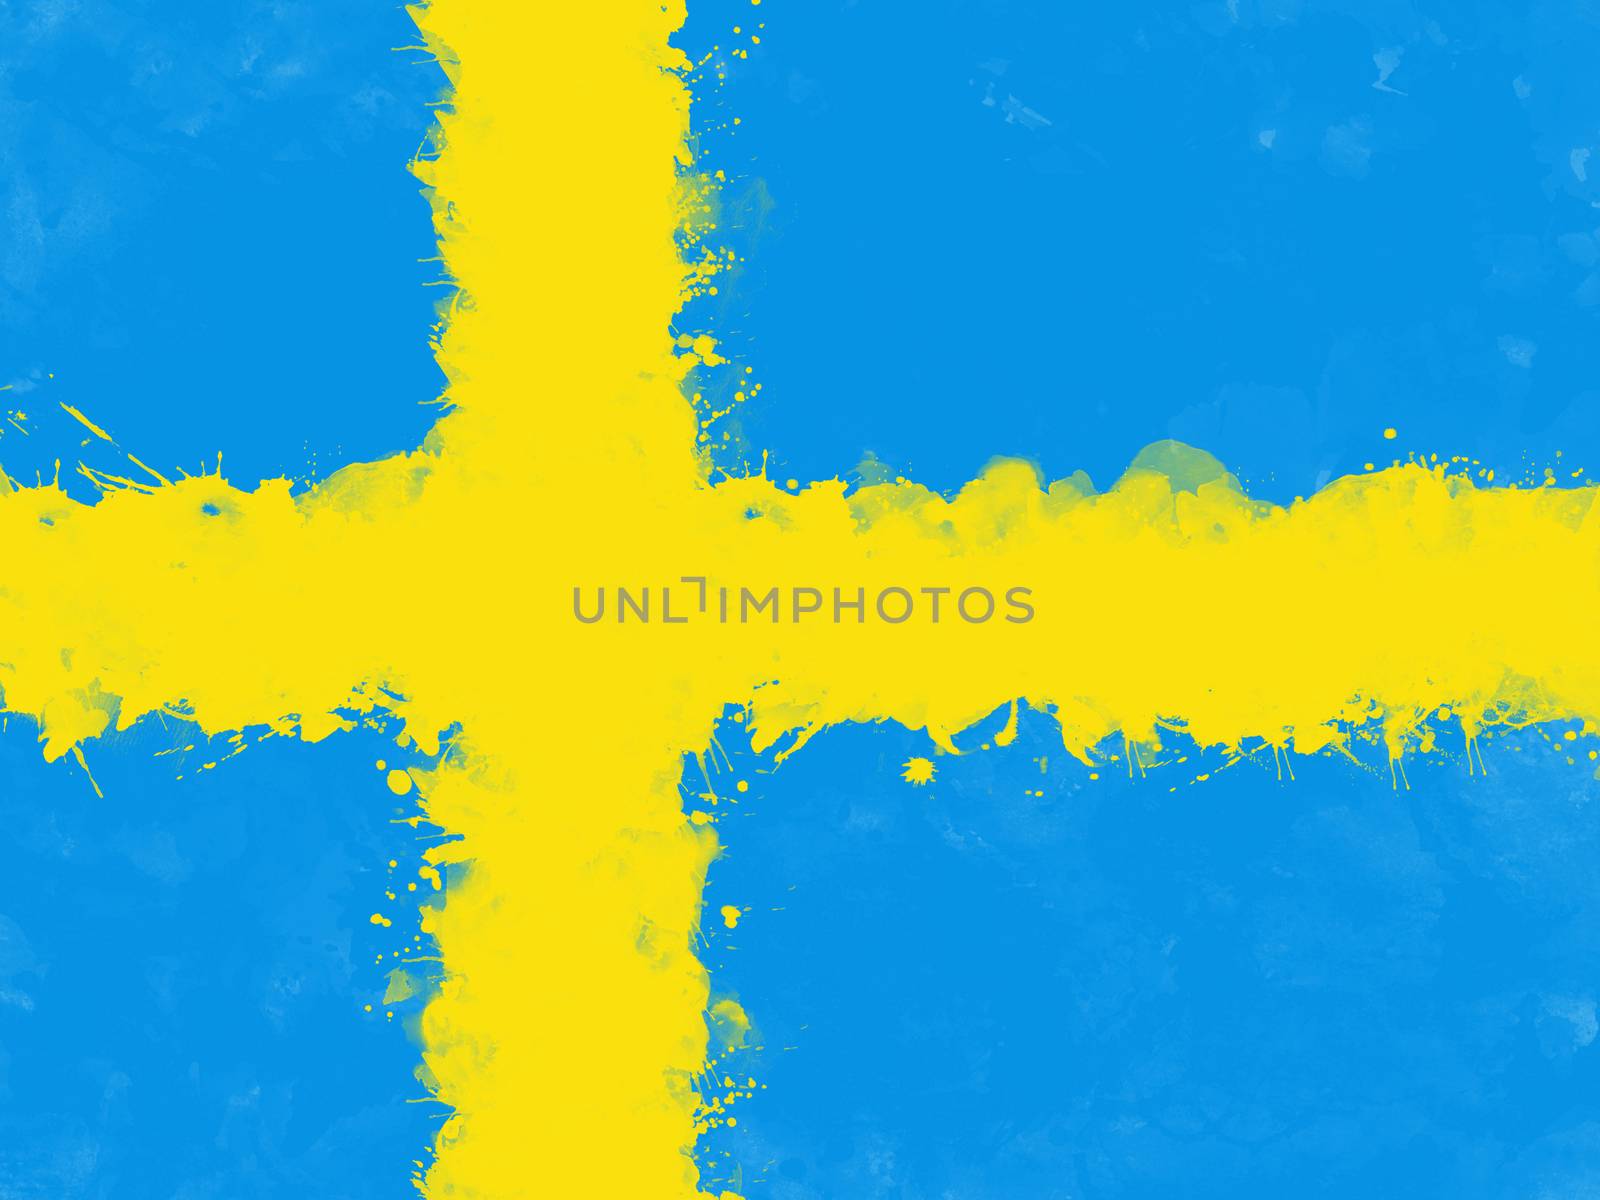 Flag of Sweden by watercolor paint brush, grunge style by asiandelight